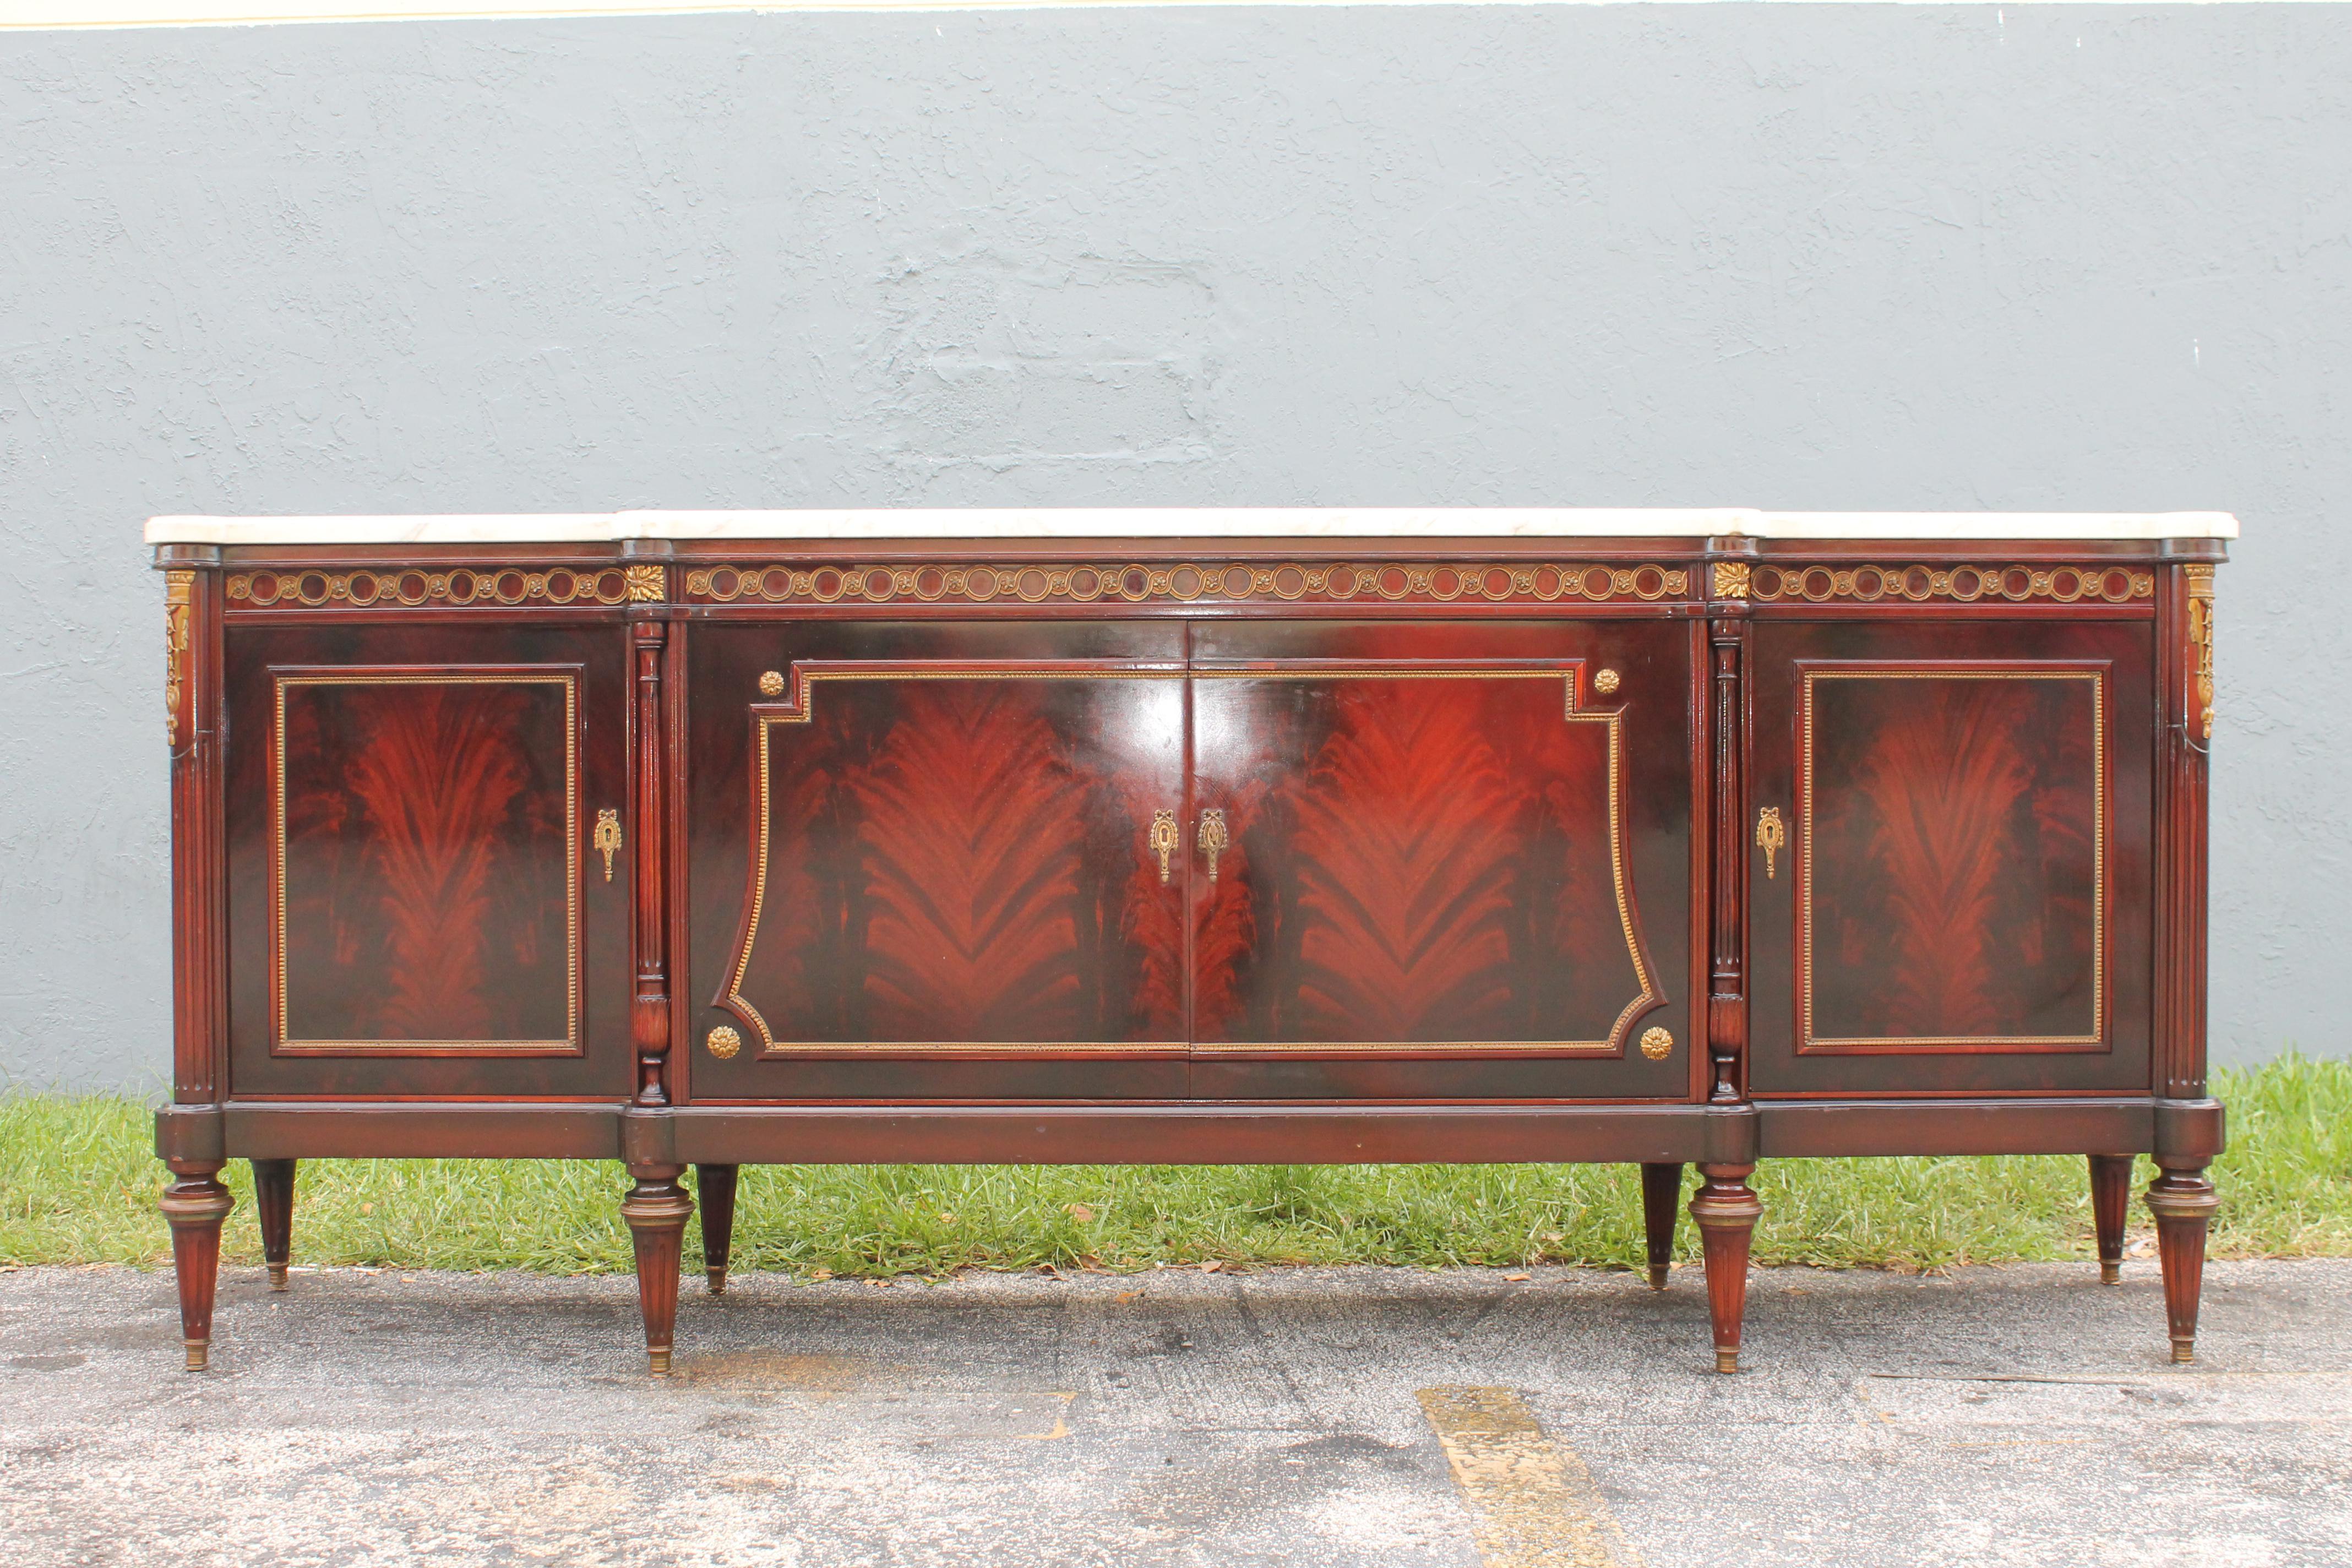 Spectacular 1920's French Neoclassical style Buffet/ Sideboard/ Credenza/ Dry B ar. Flame Mahogany with the most beautiful marble top. Opens to reveal drawer storage/ shelf storage and a dry bar on the right which has hidden lights. The adornment is